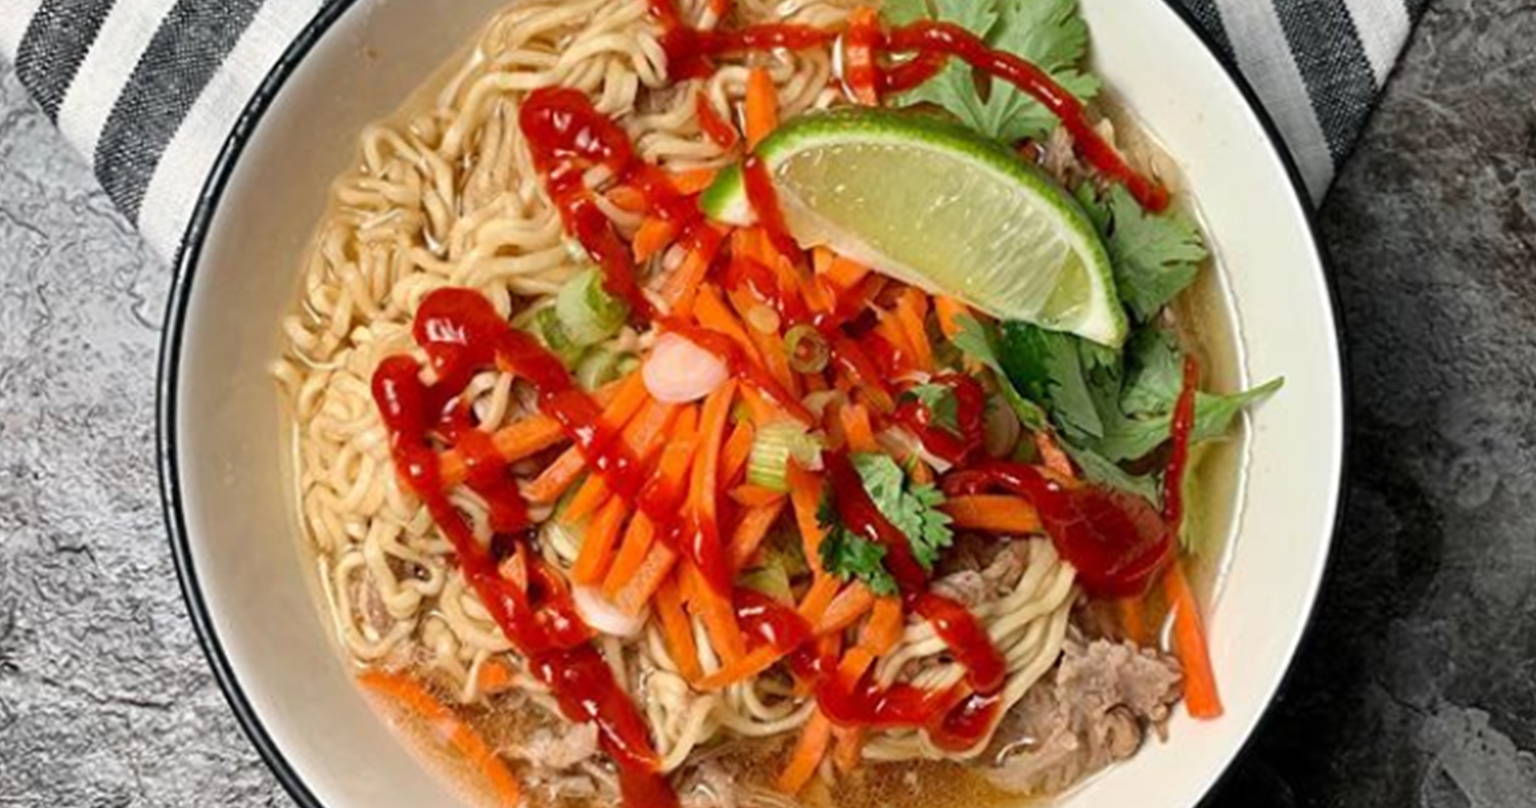 A bowl of noodles with a variety of ingredients